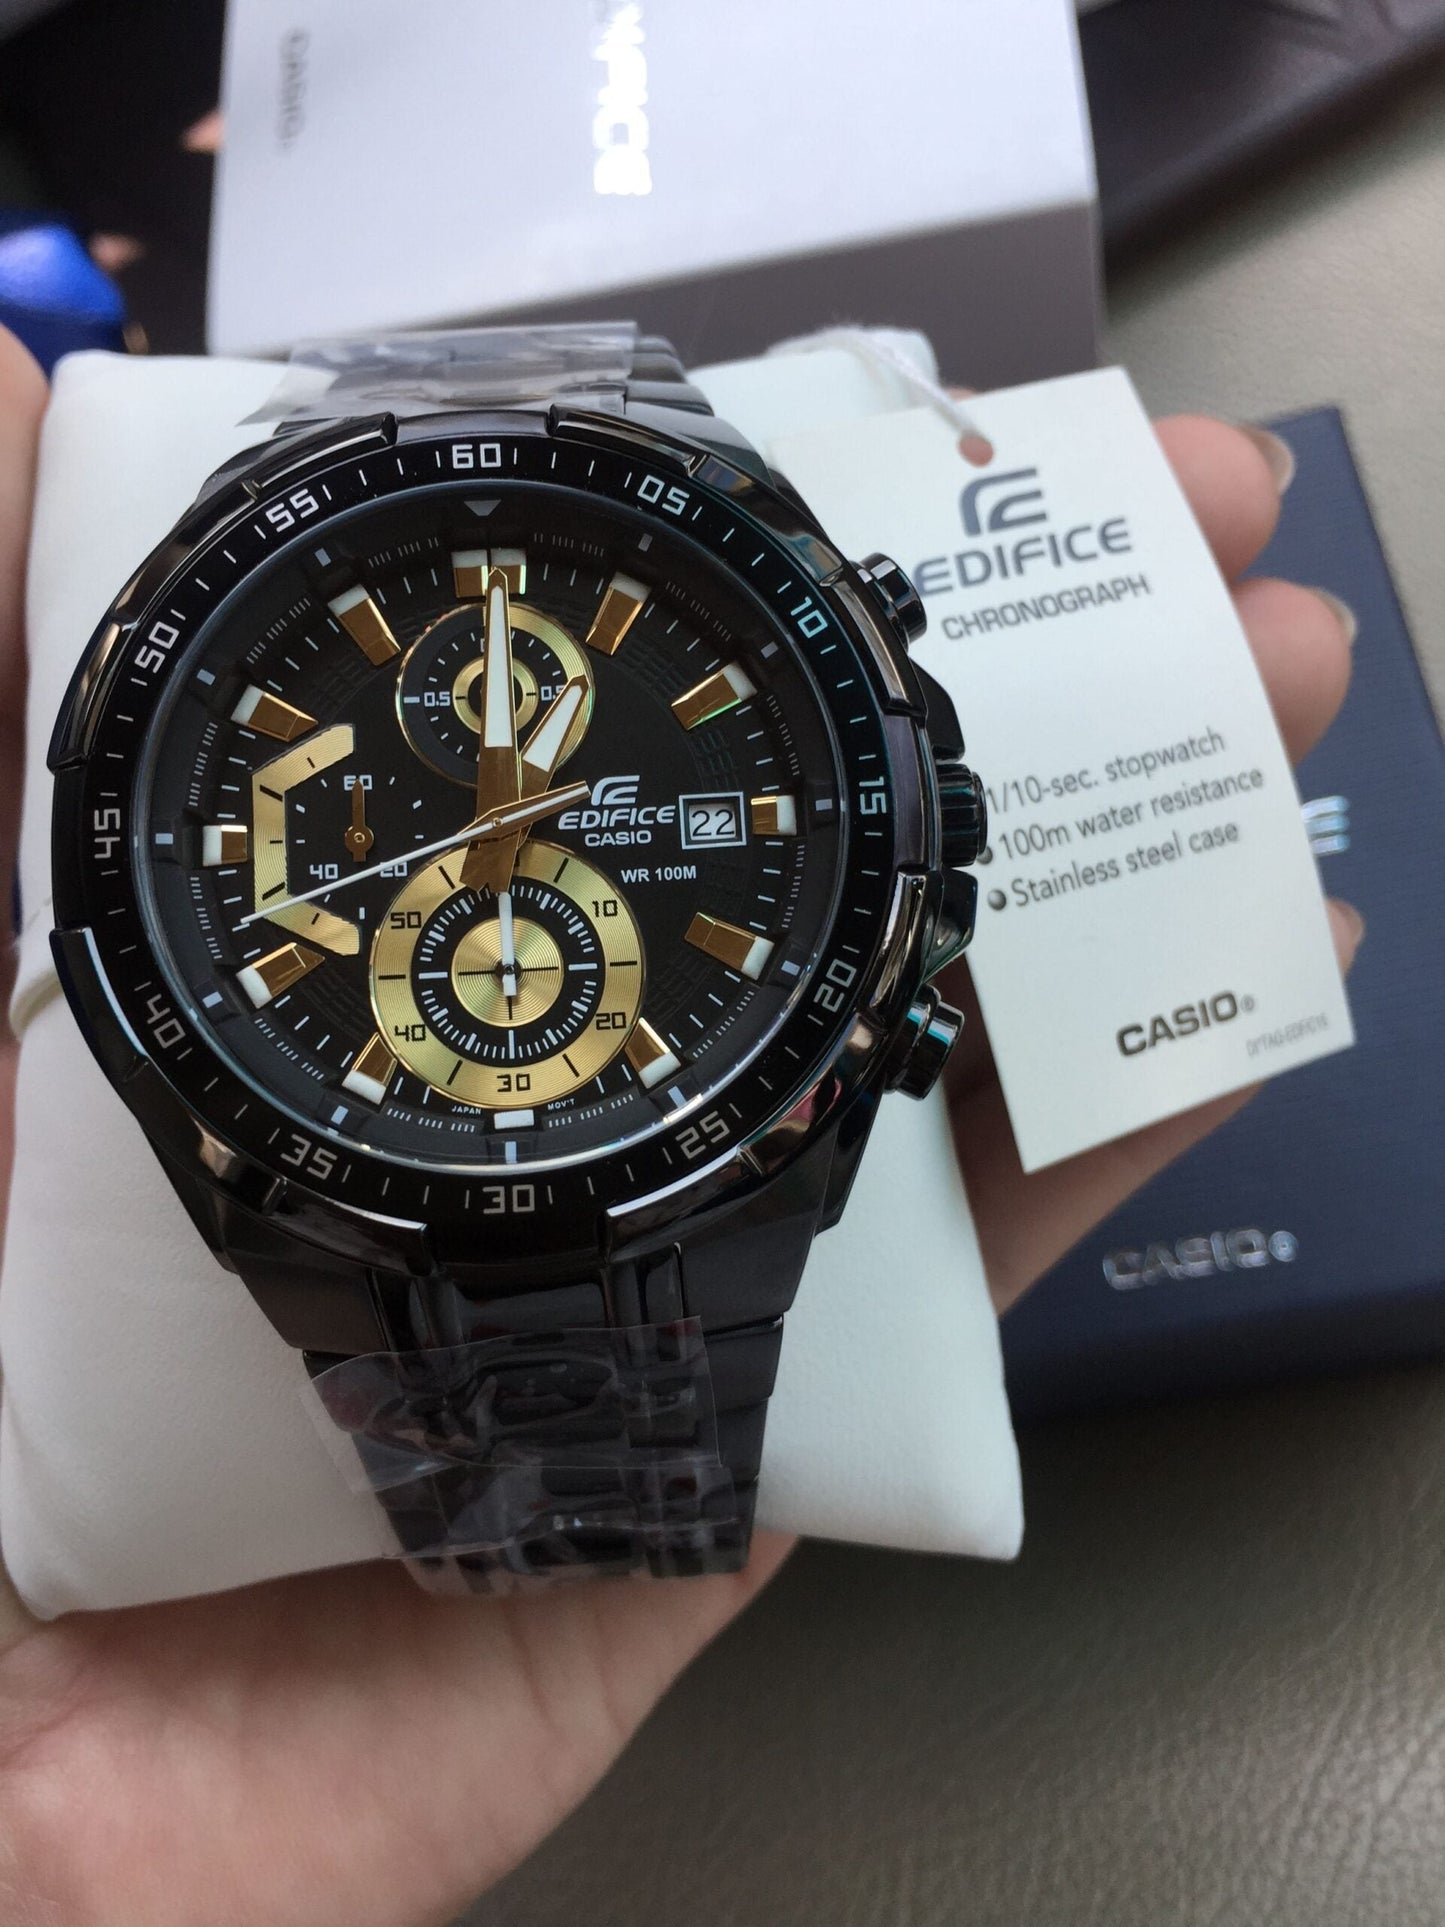 Casio Edifice Chronograph With Black Stainless steel Strap Men's Watch Black Gold 539BK